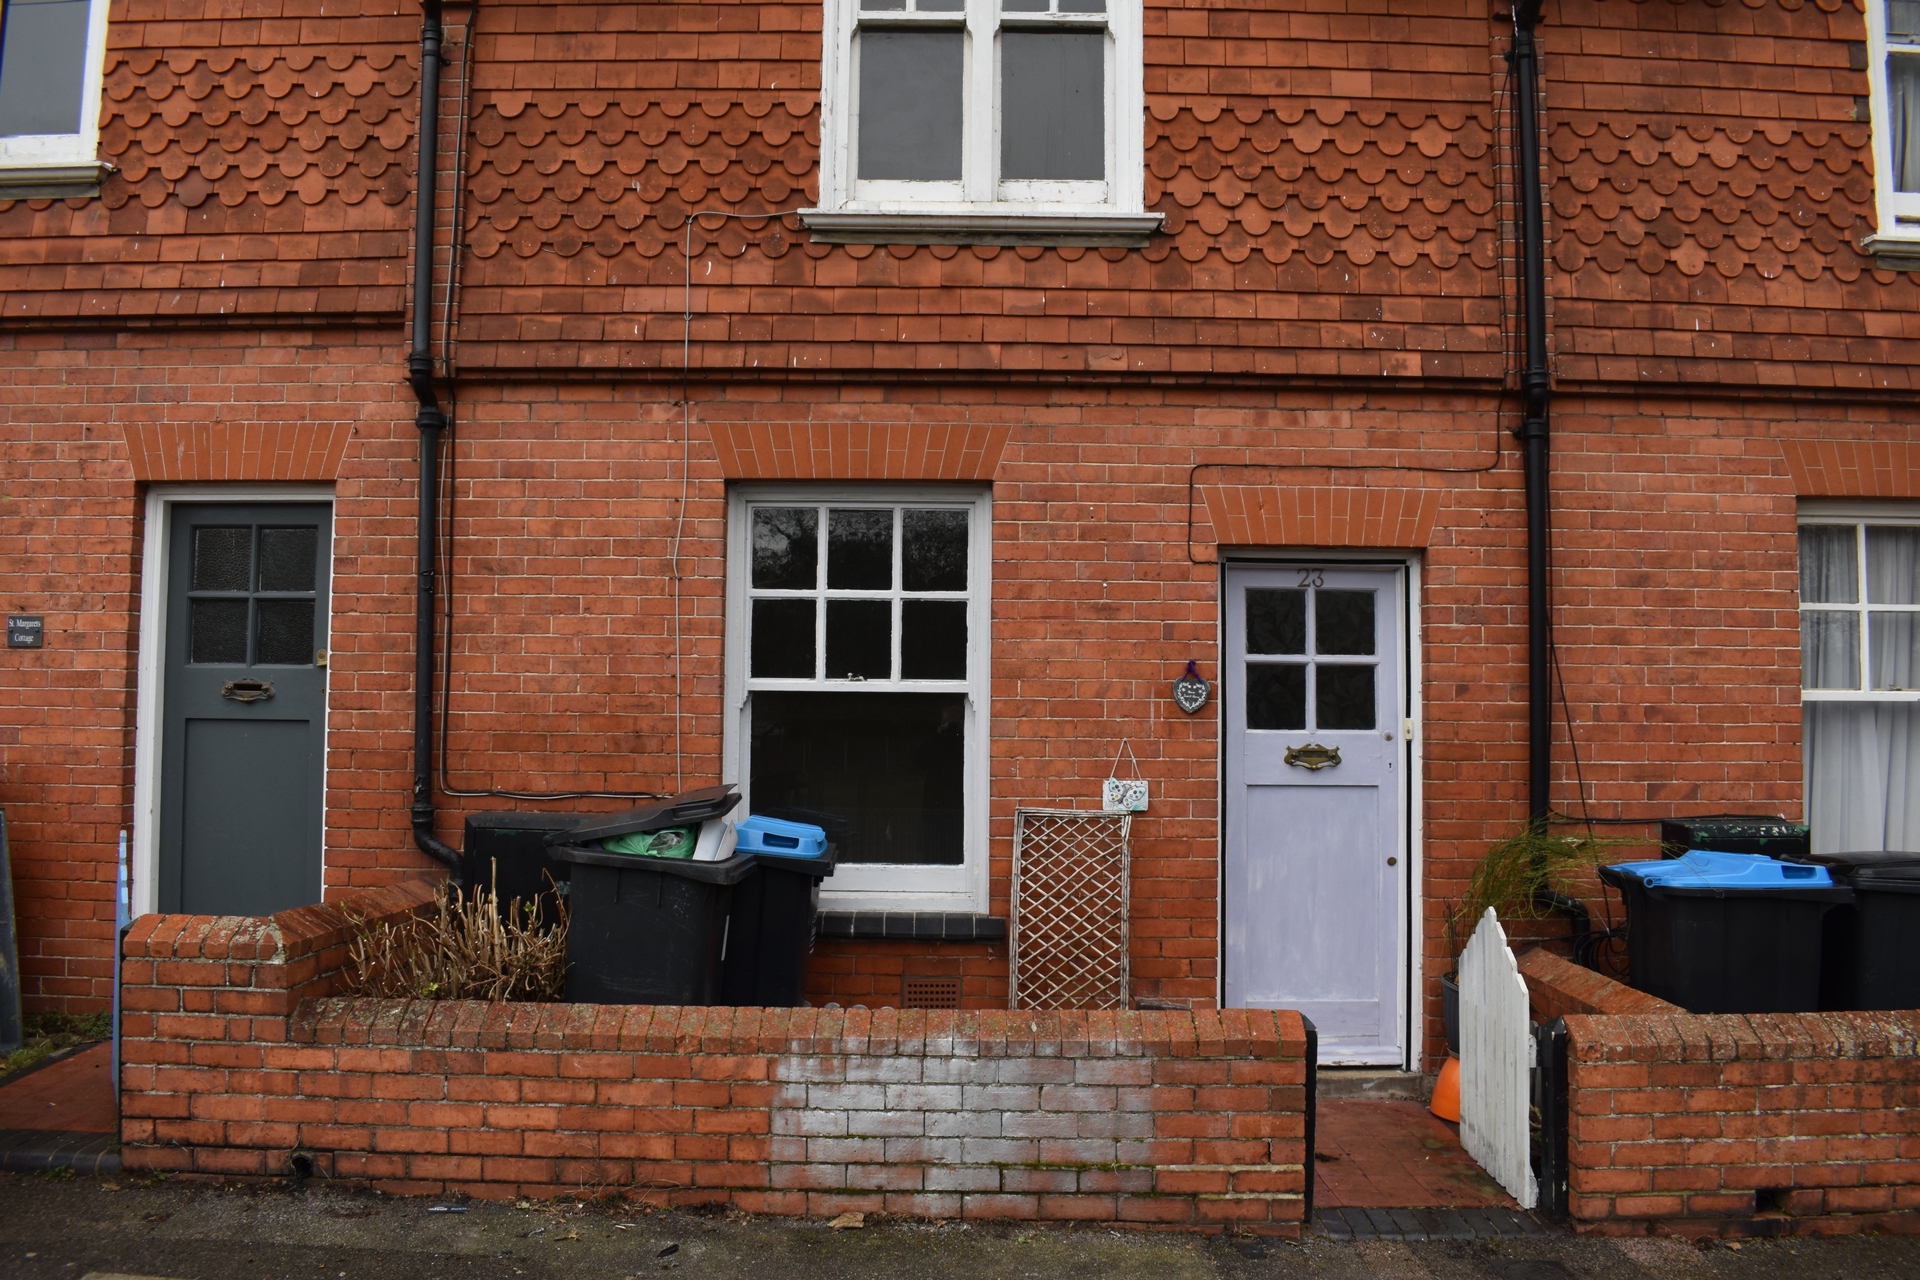 This 2 bedroom house is available now. The kitchen diner has a built in oven and hob with fitted units as well as an additional pantry cupboard. The kitchen looks out into the rear garden which has a patio area and storage. 